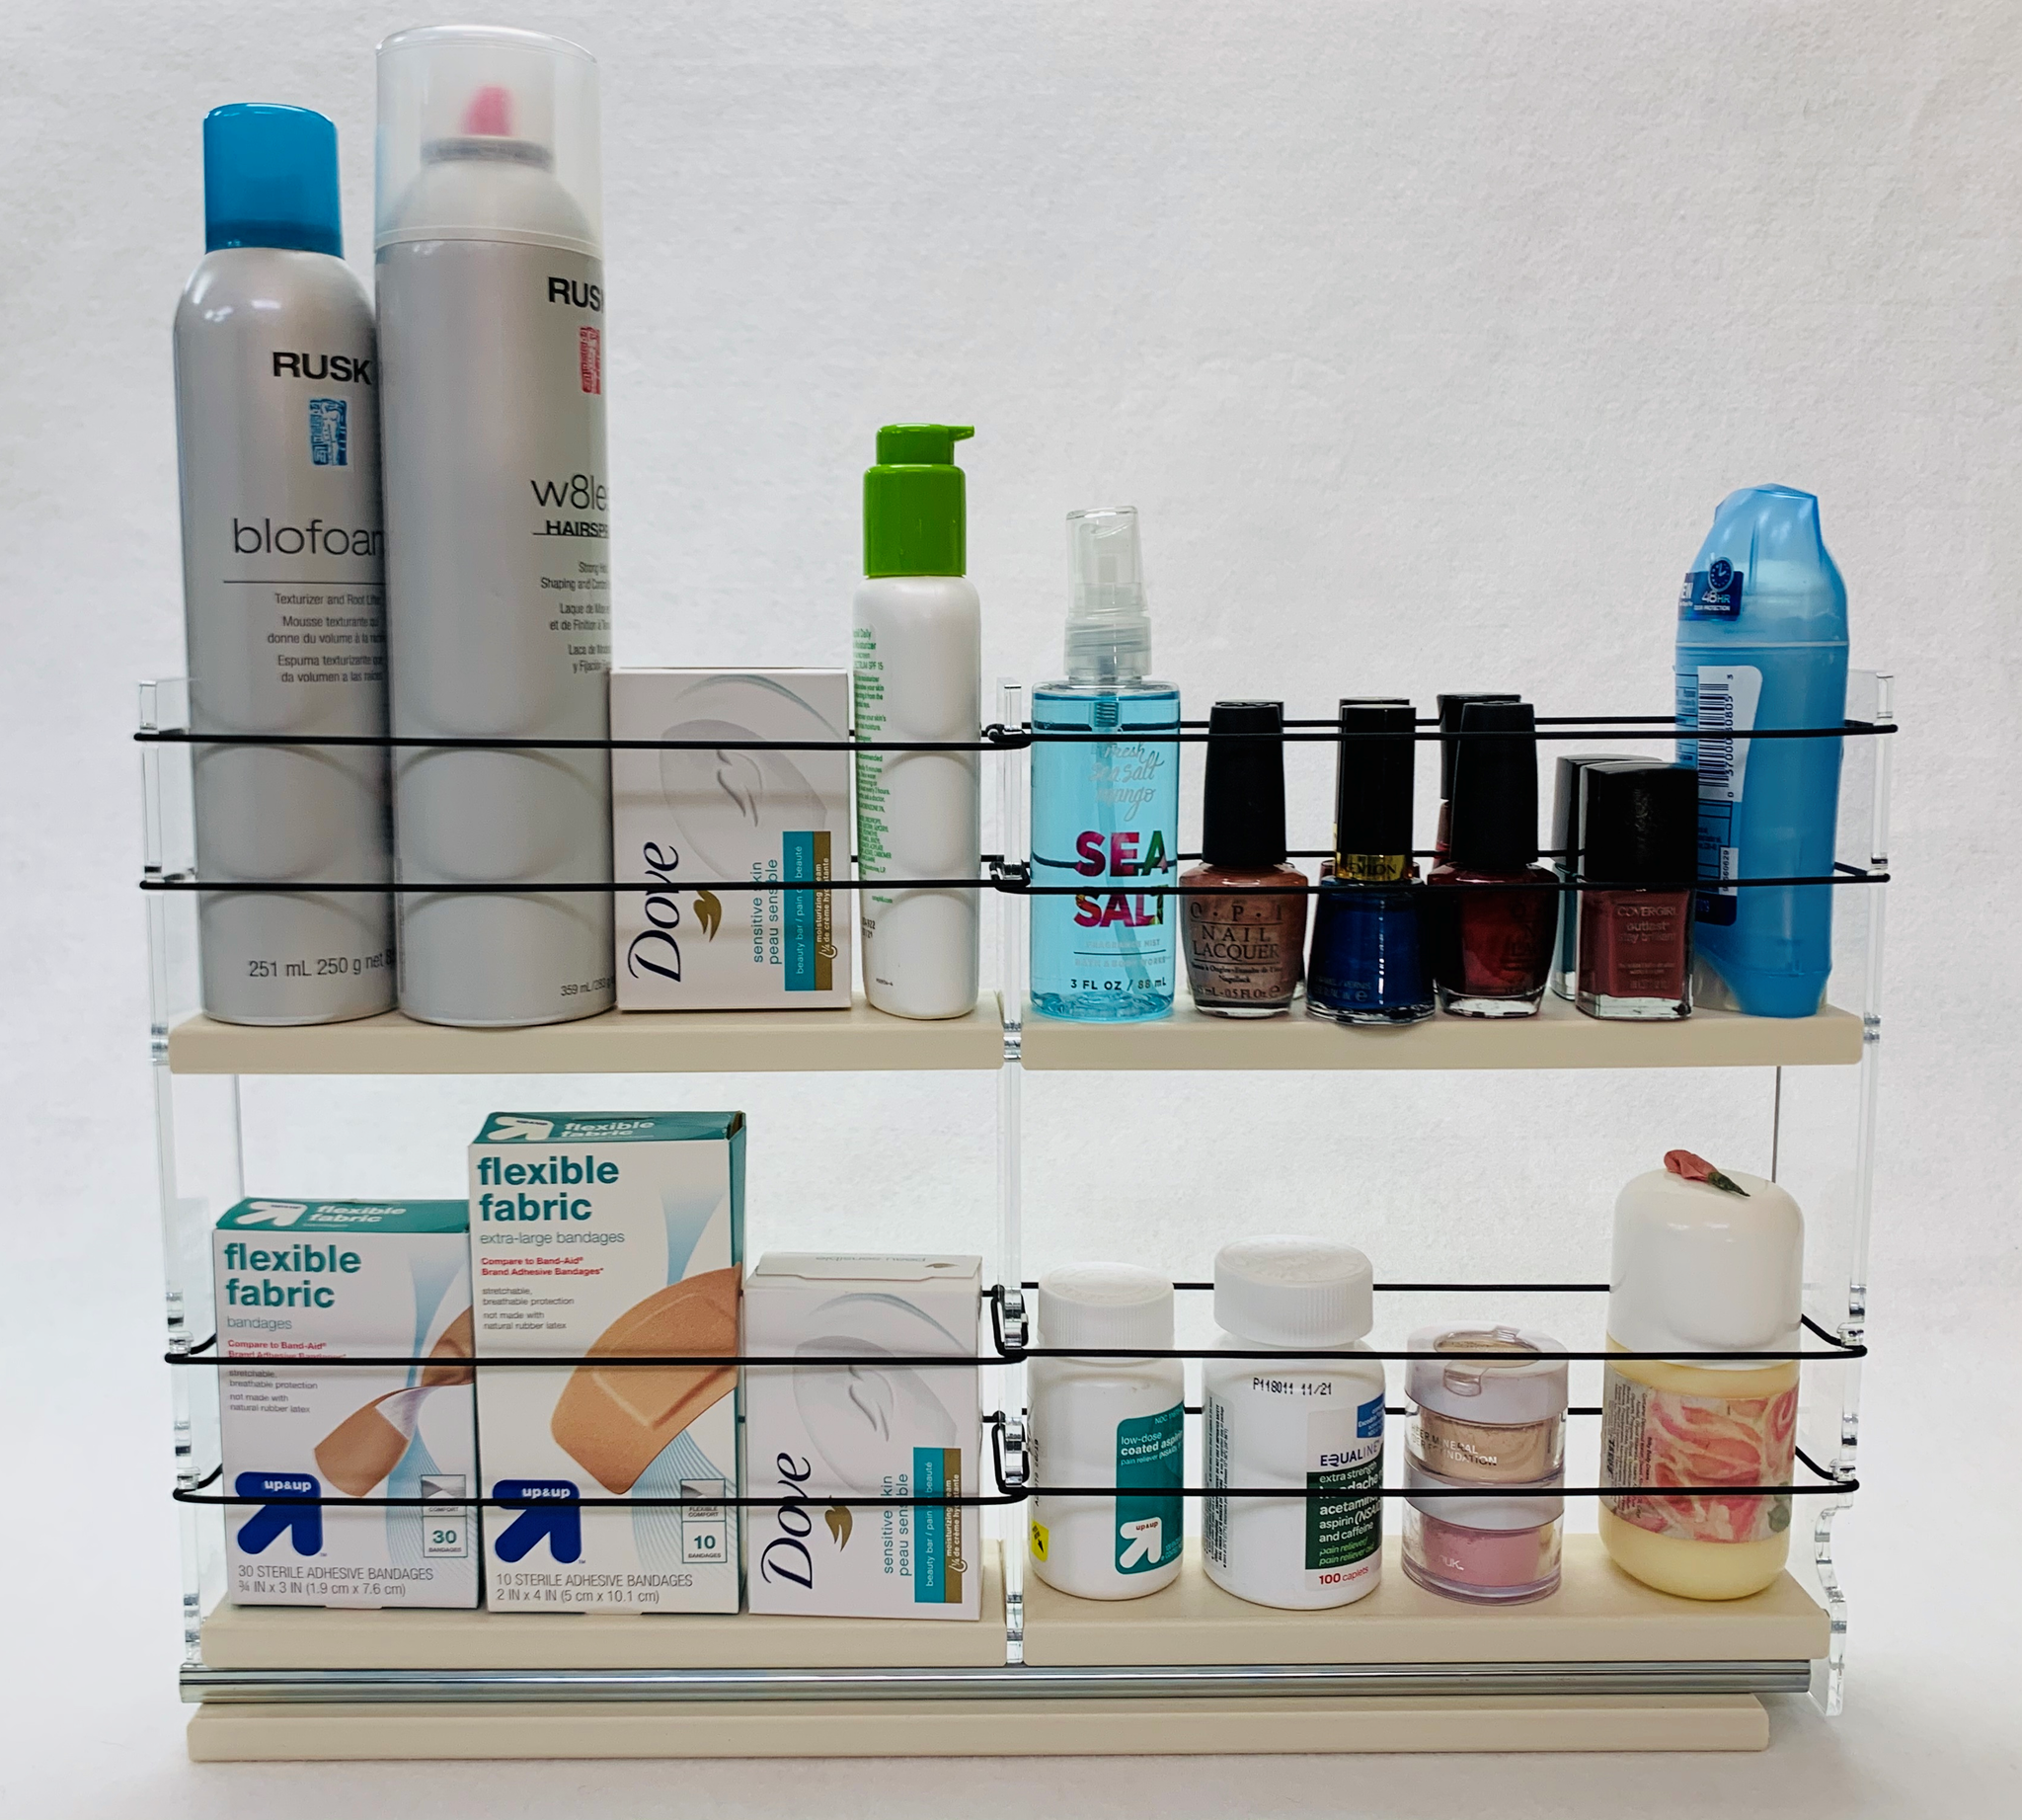 Adhesive Spice Rack Organizer Wall Mount, Clear Acrylic Shelves [3